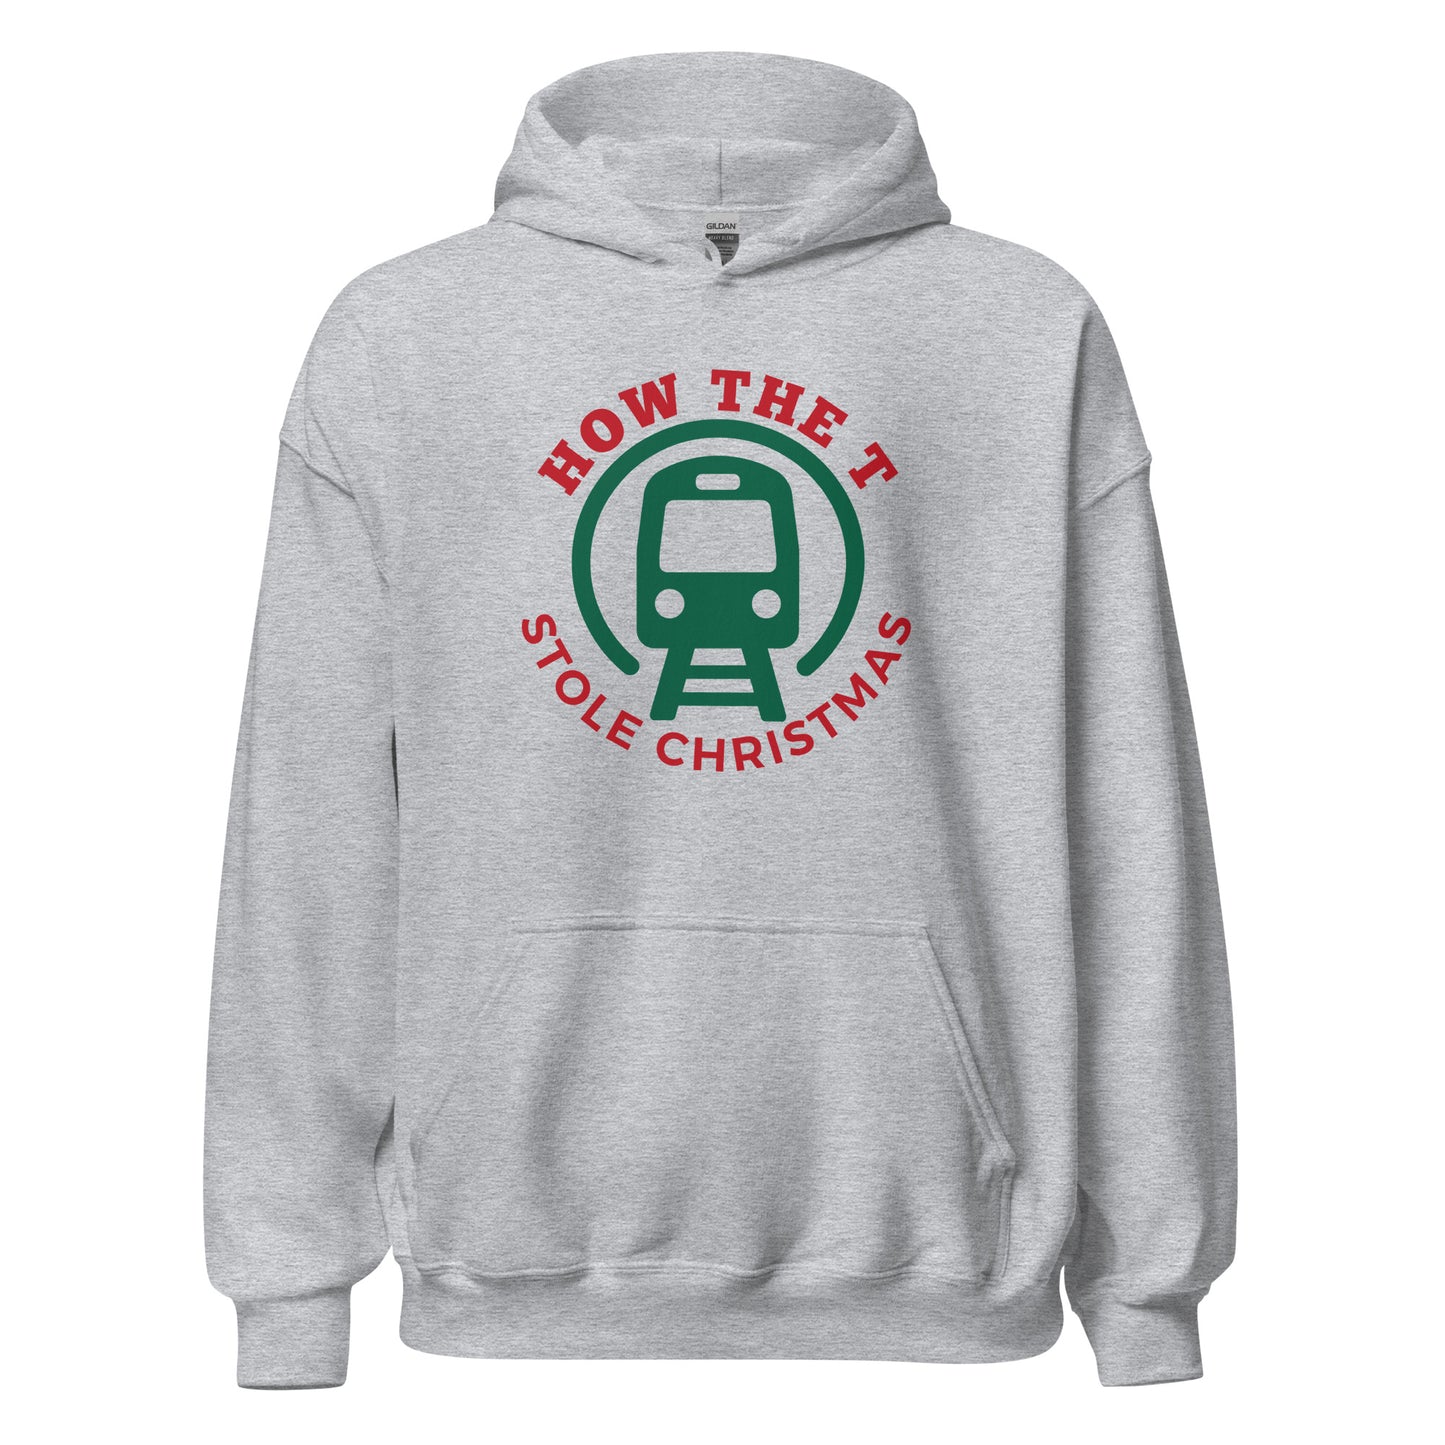 How the T Stole Christmas Hoodie